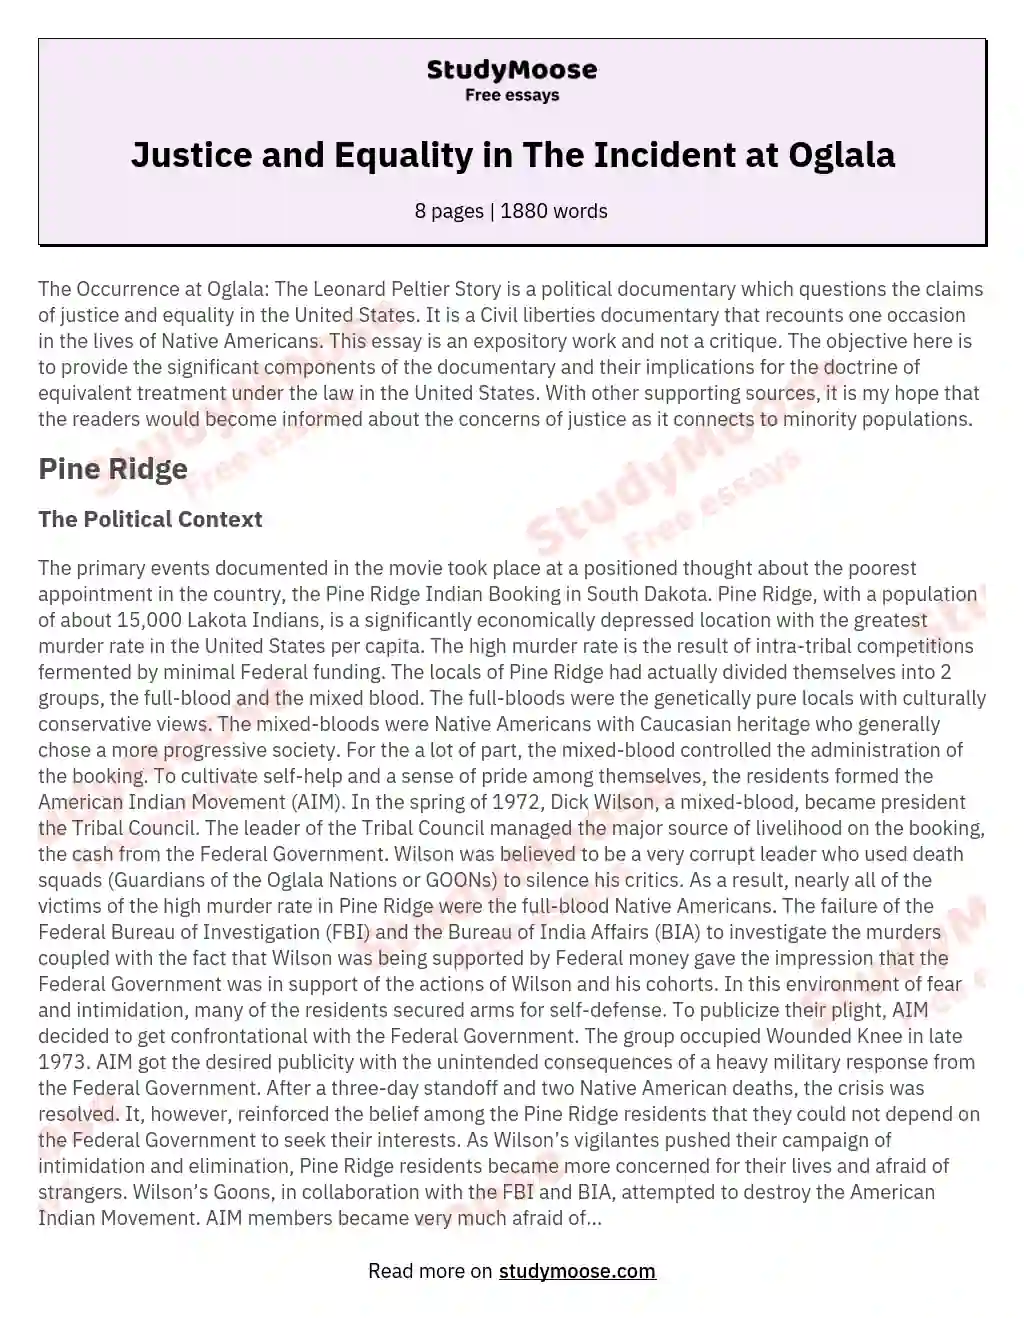 Justice and Equality in The Incident at Oglala essay